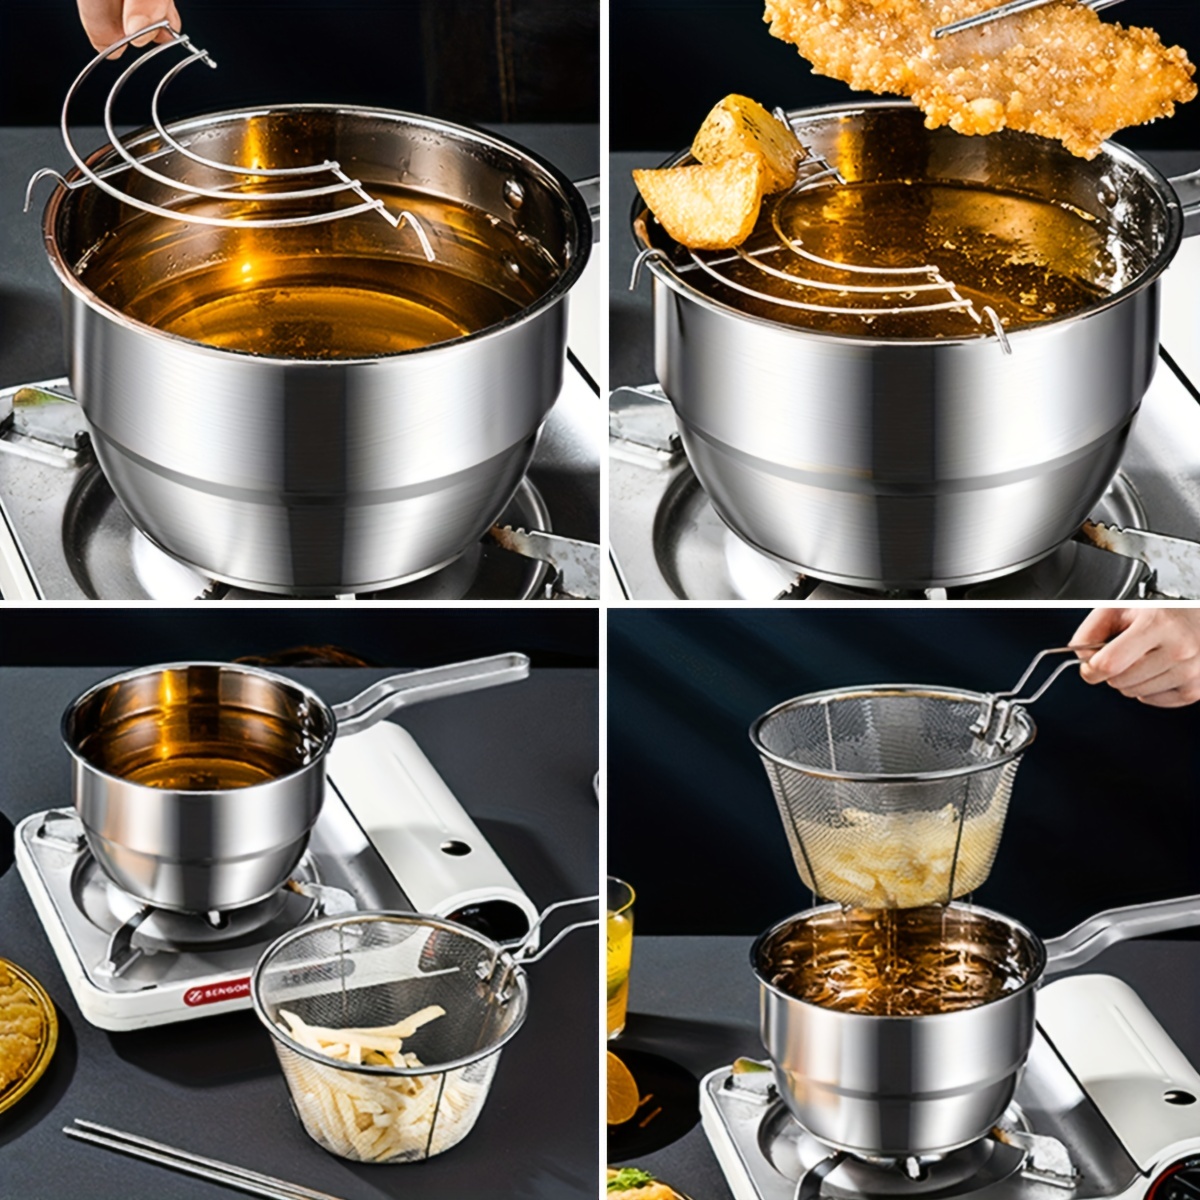 4pcs/set Stainless Steel Deep Frying Pan with Strainer Insert -  Multifunctional Stock Pot for Home Kitchen Cookware Sets